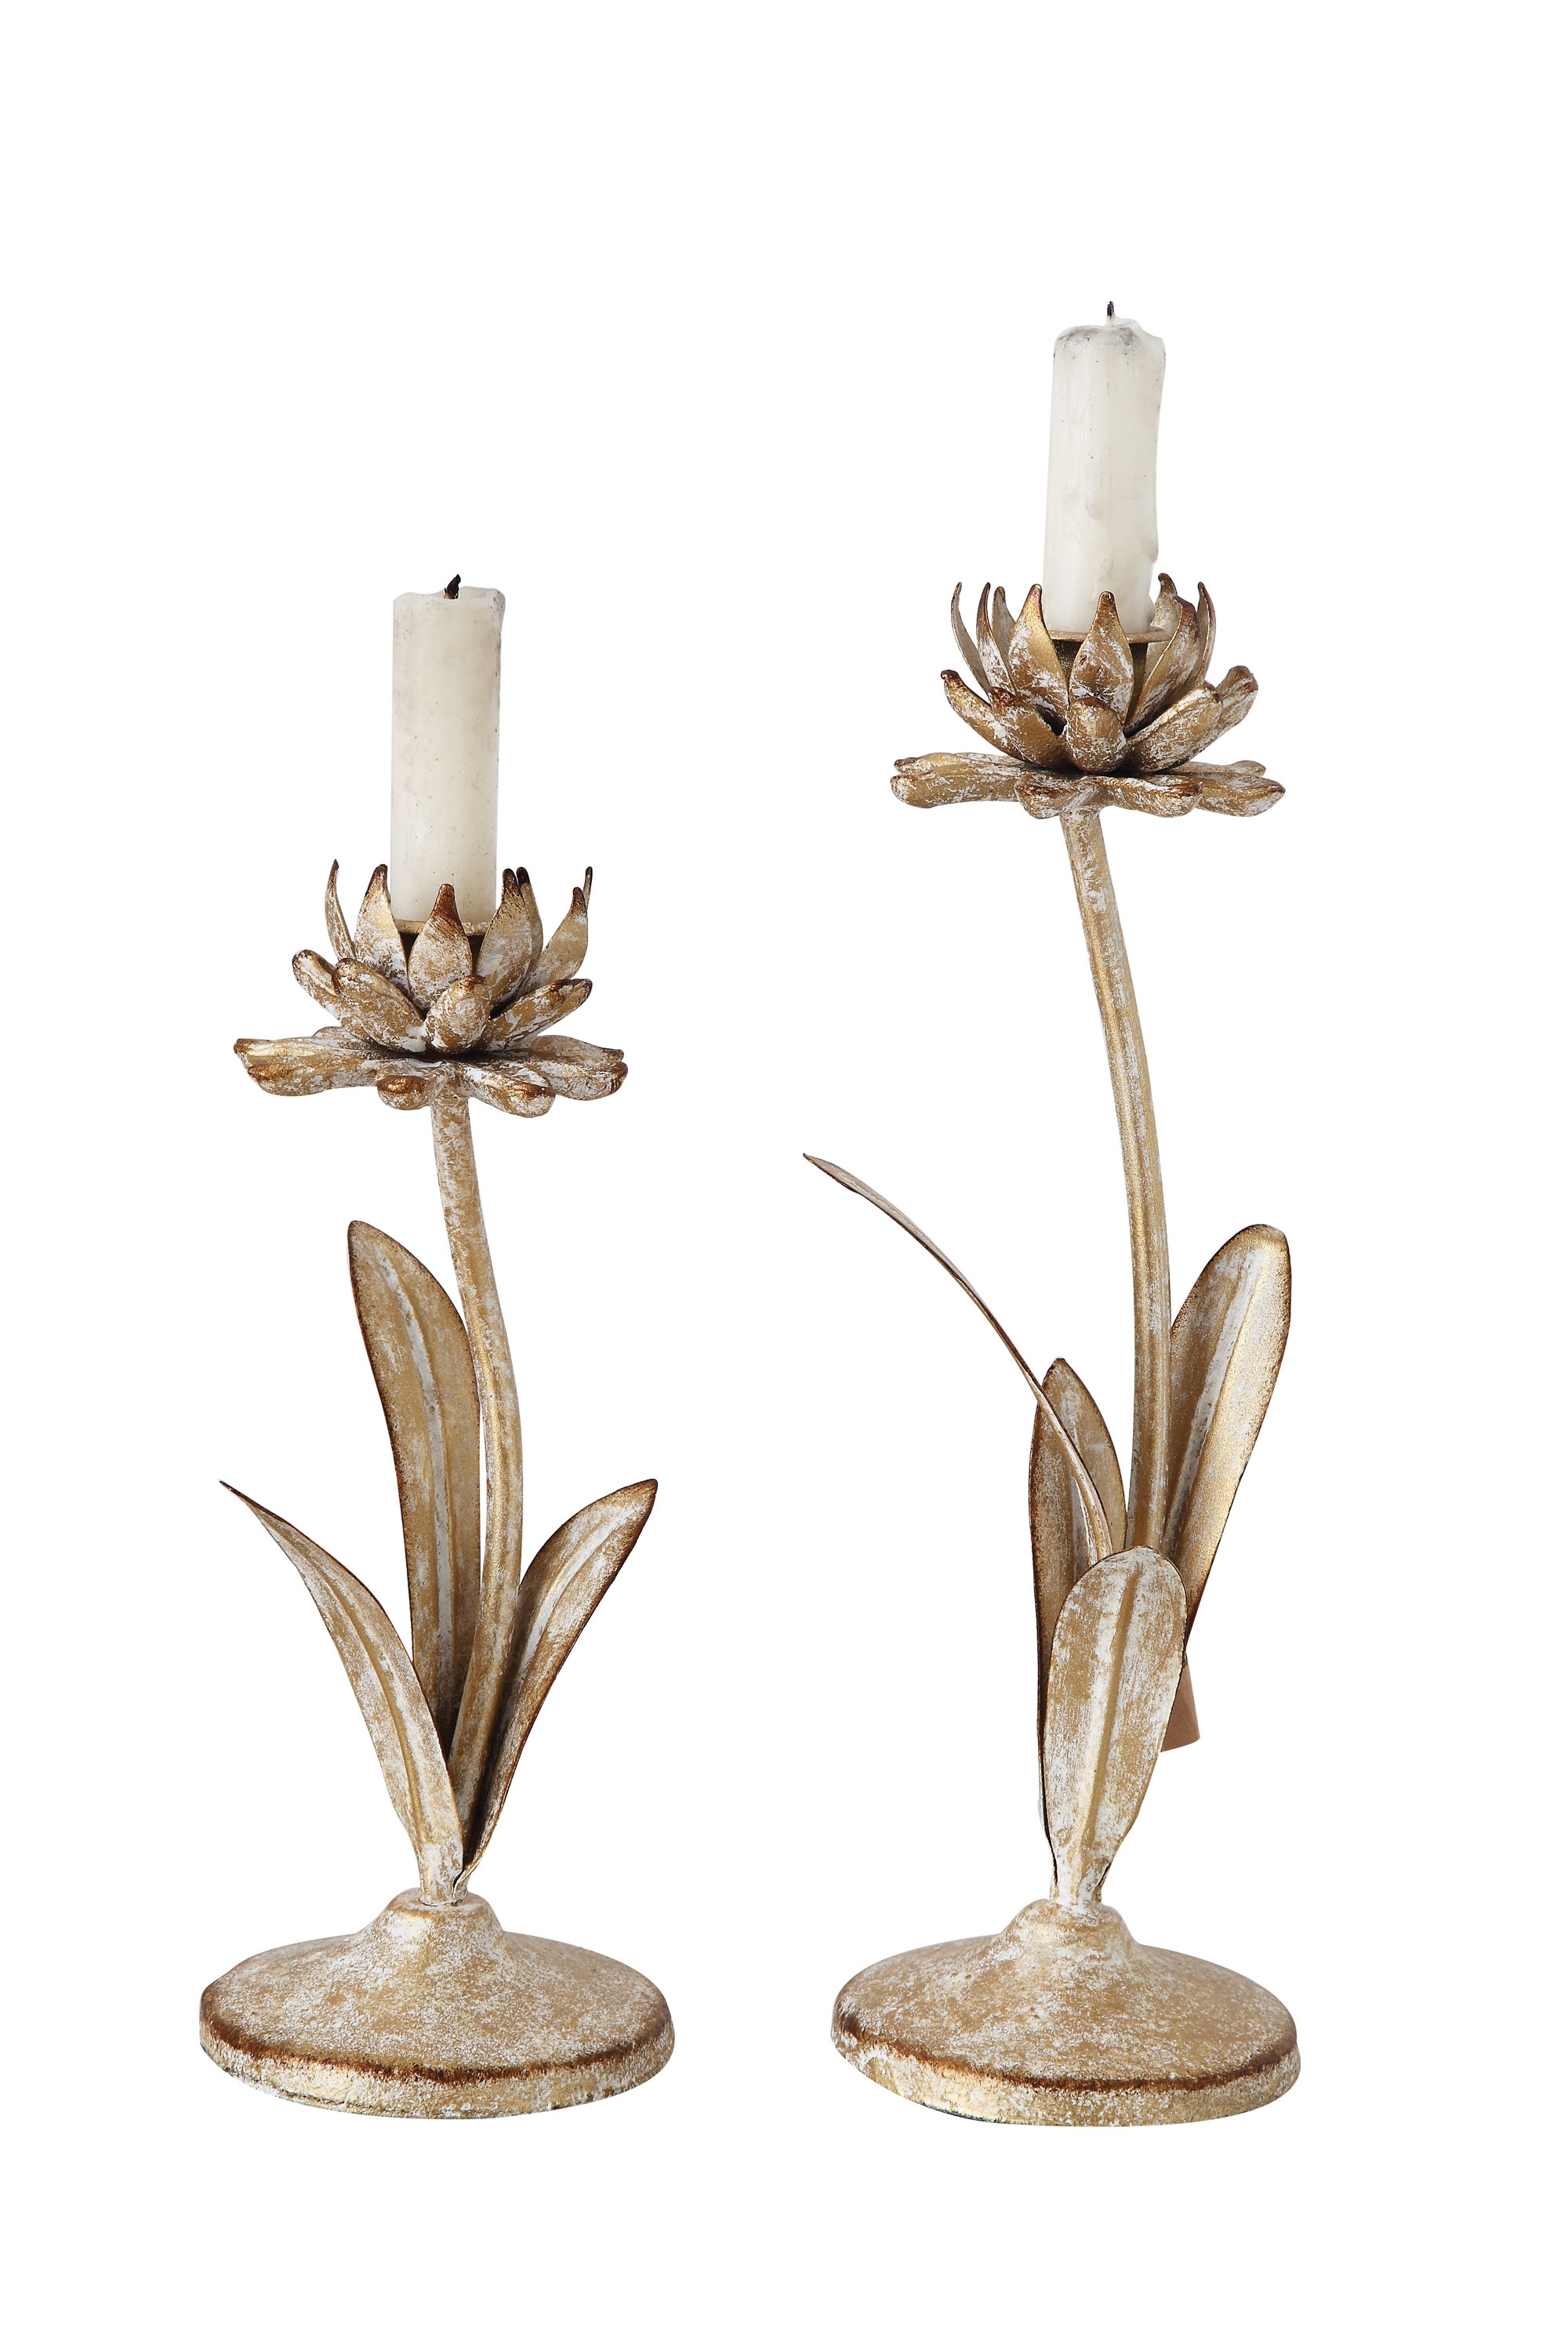 Cut Metal Flower Shaped Taper Candleholder in Distressed Gold Finish (Set of 2 Sizes) - Image 0